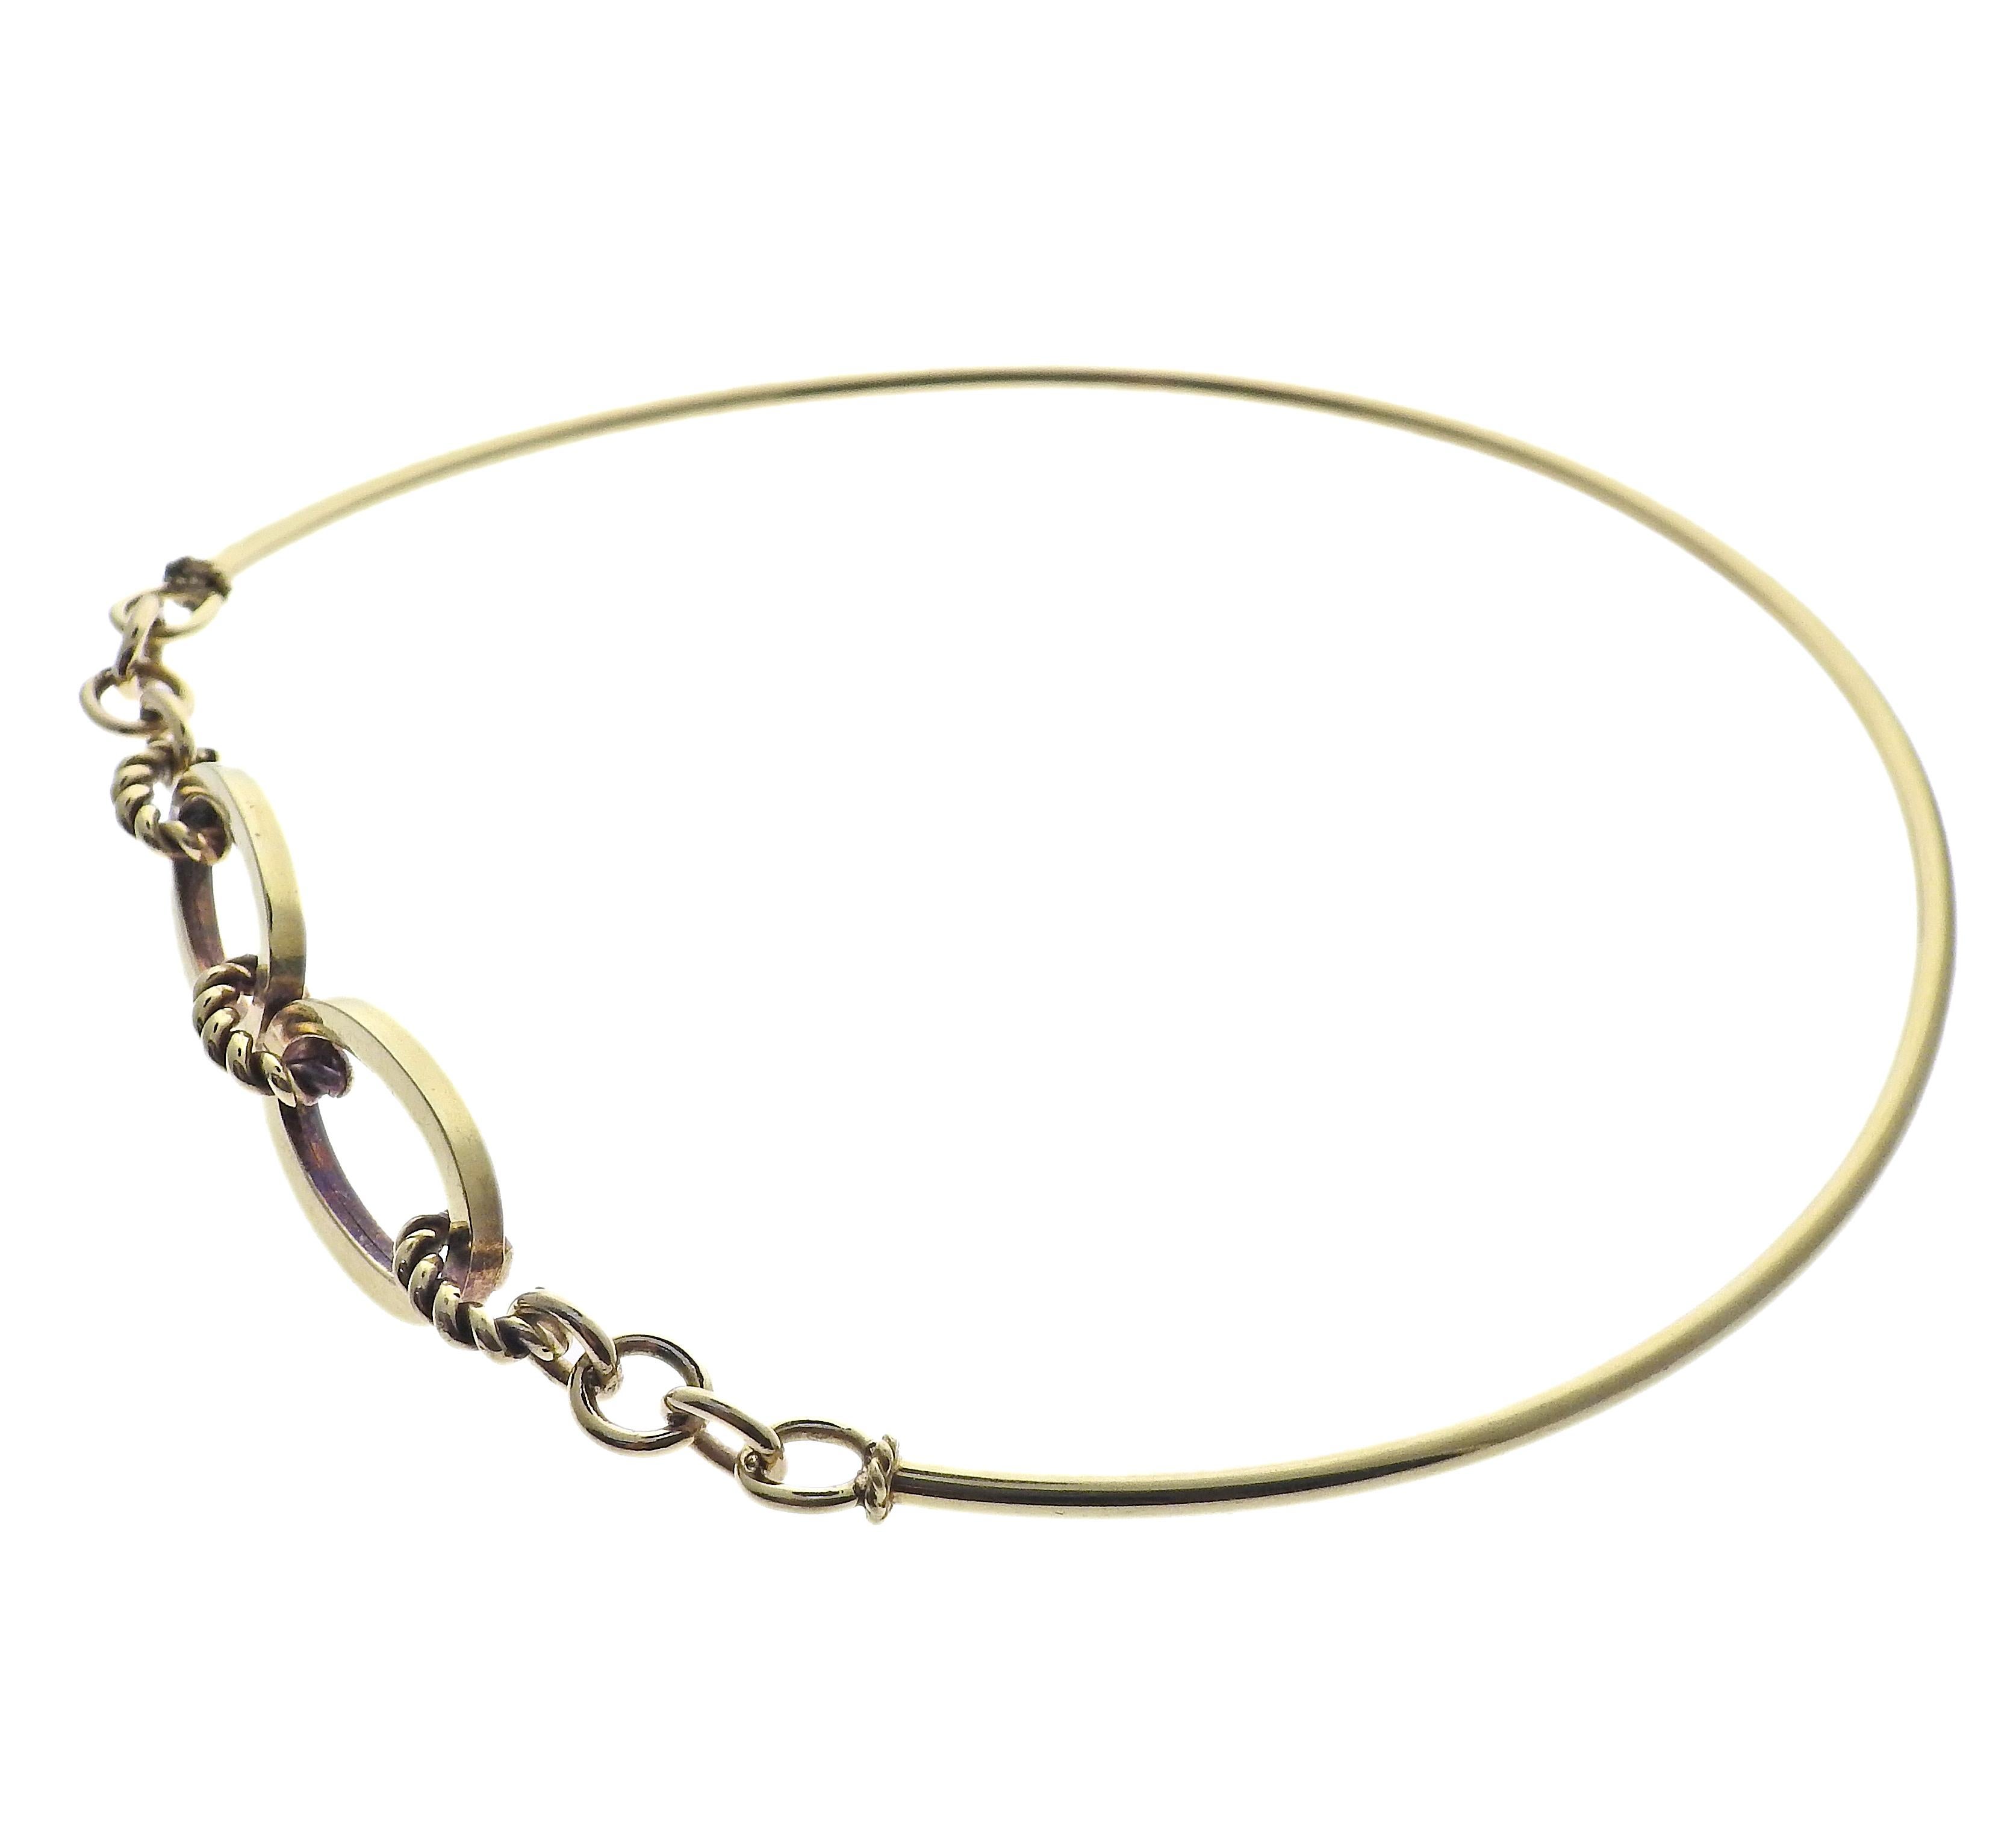 Vintage circa 1960s 18k gold link choker necklace by Cartier. Necklace will fit approx. 13